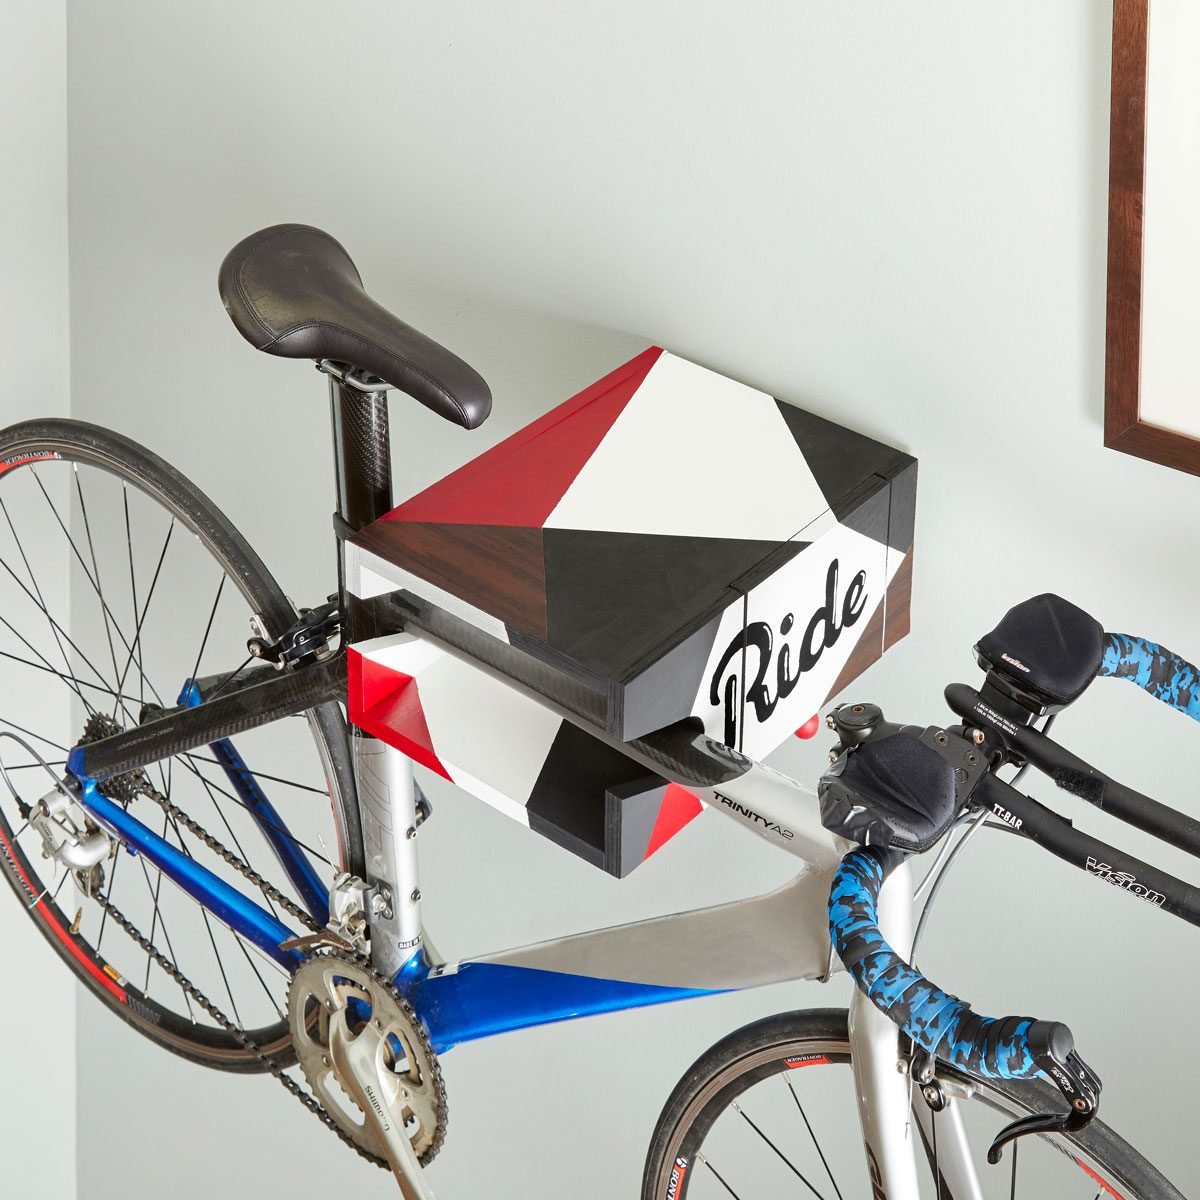 9 Clever Bike Storage Ideas (For Garages and Inside the Home